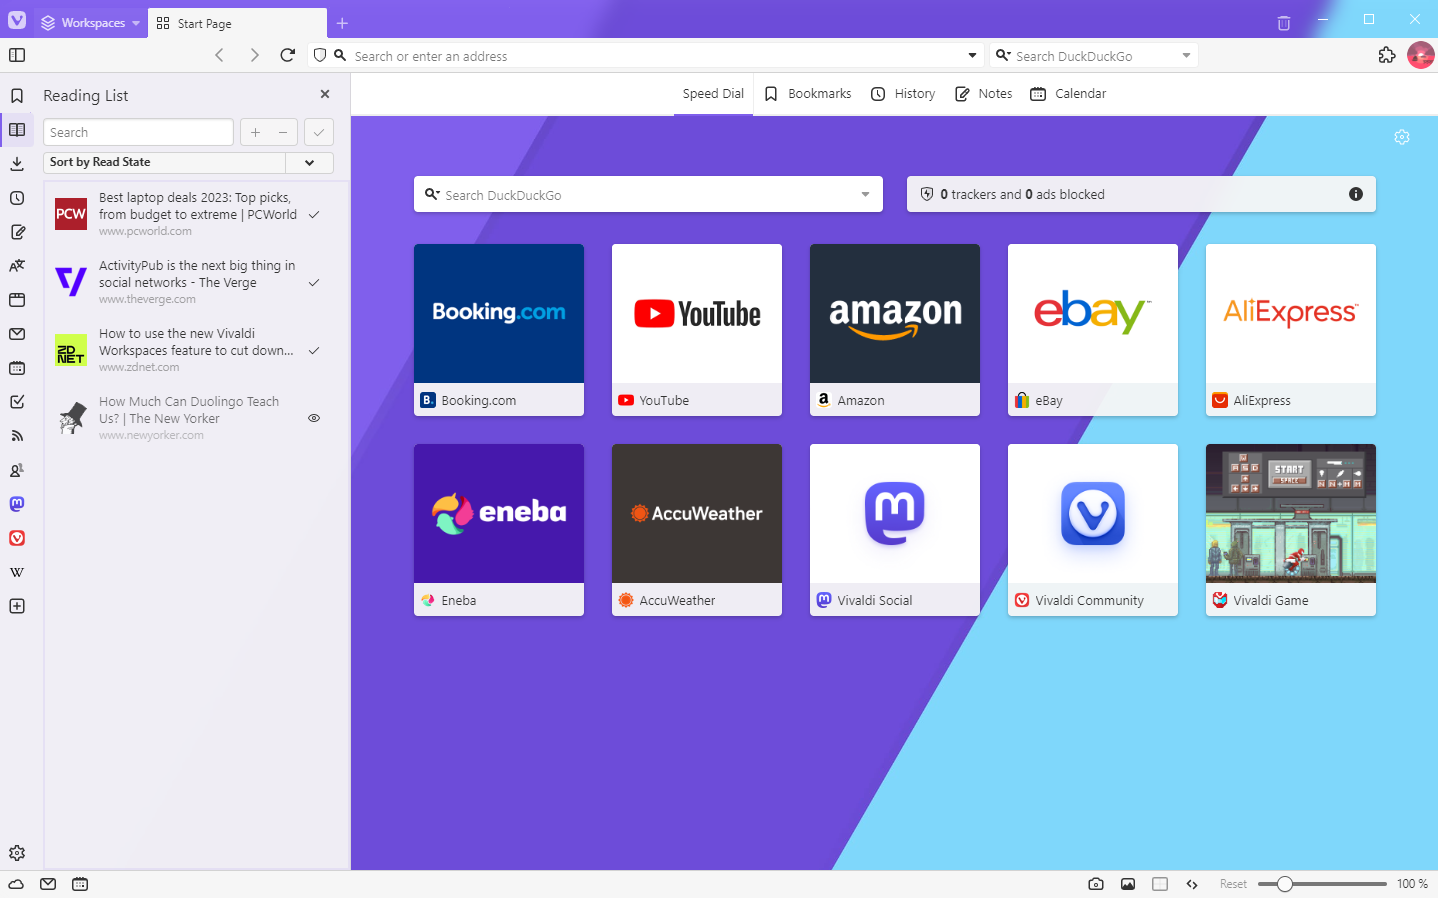 Vivaldi Browser with Panel bar on the left. Reading List Panel is open.